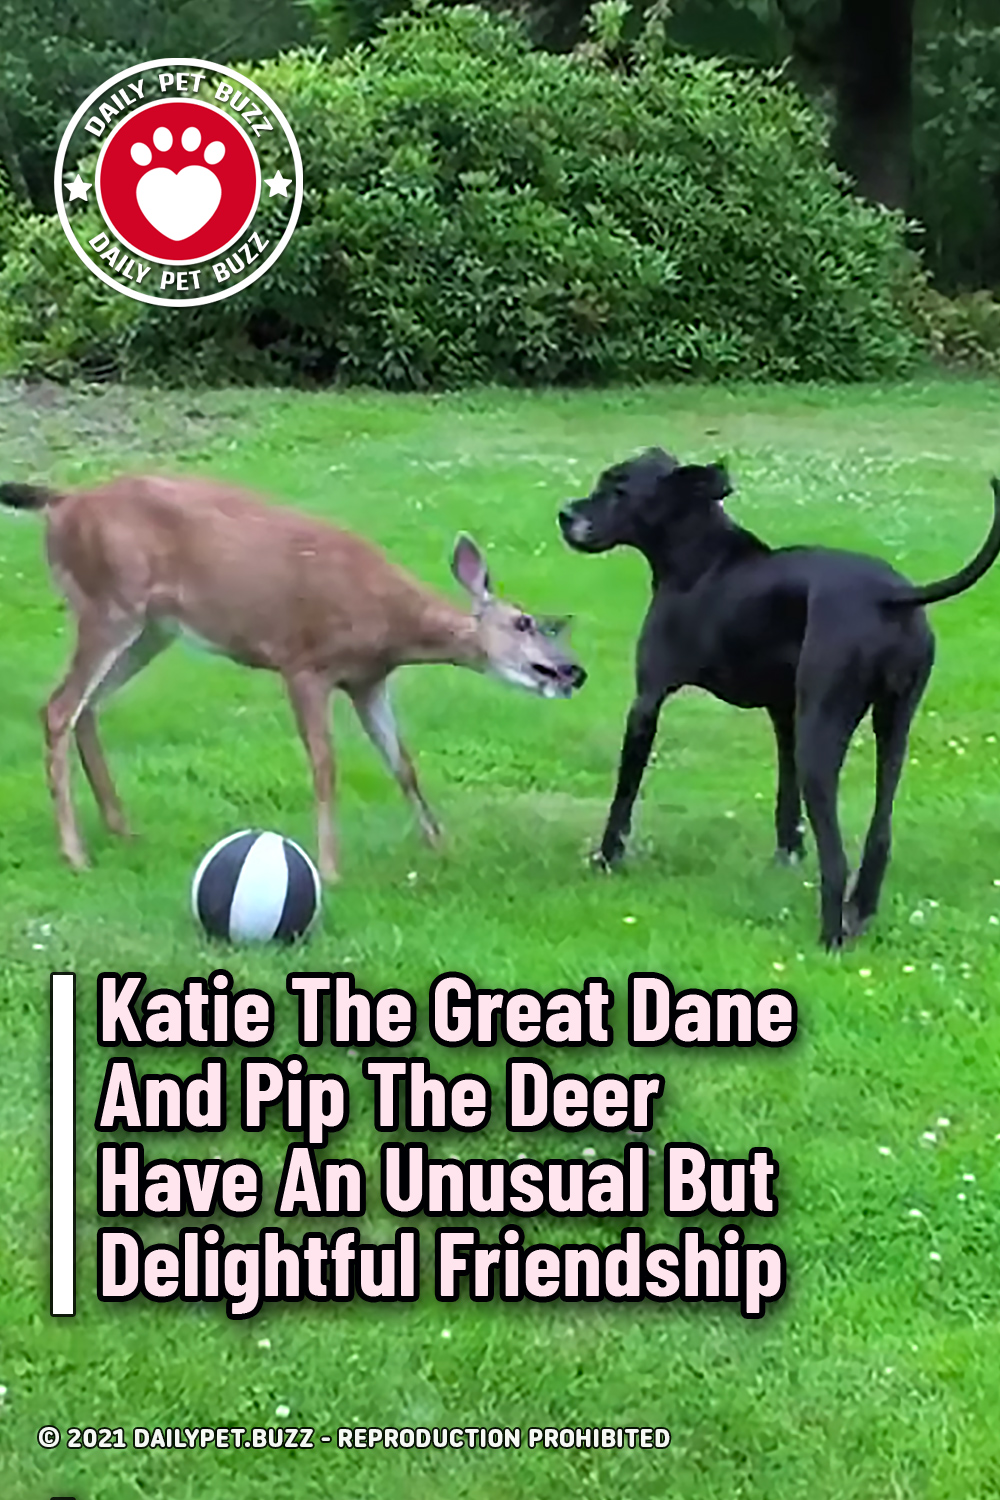 Katie The Great Dane And Pip The Deer Have An Unusual But Delightful Friendship